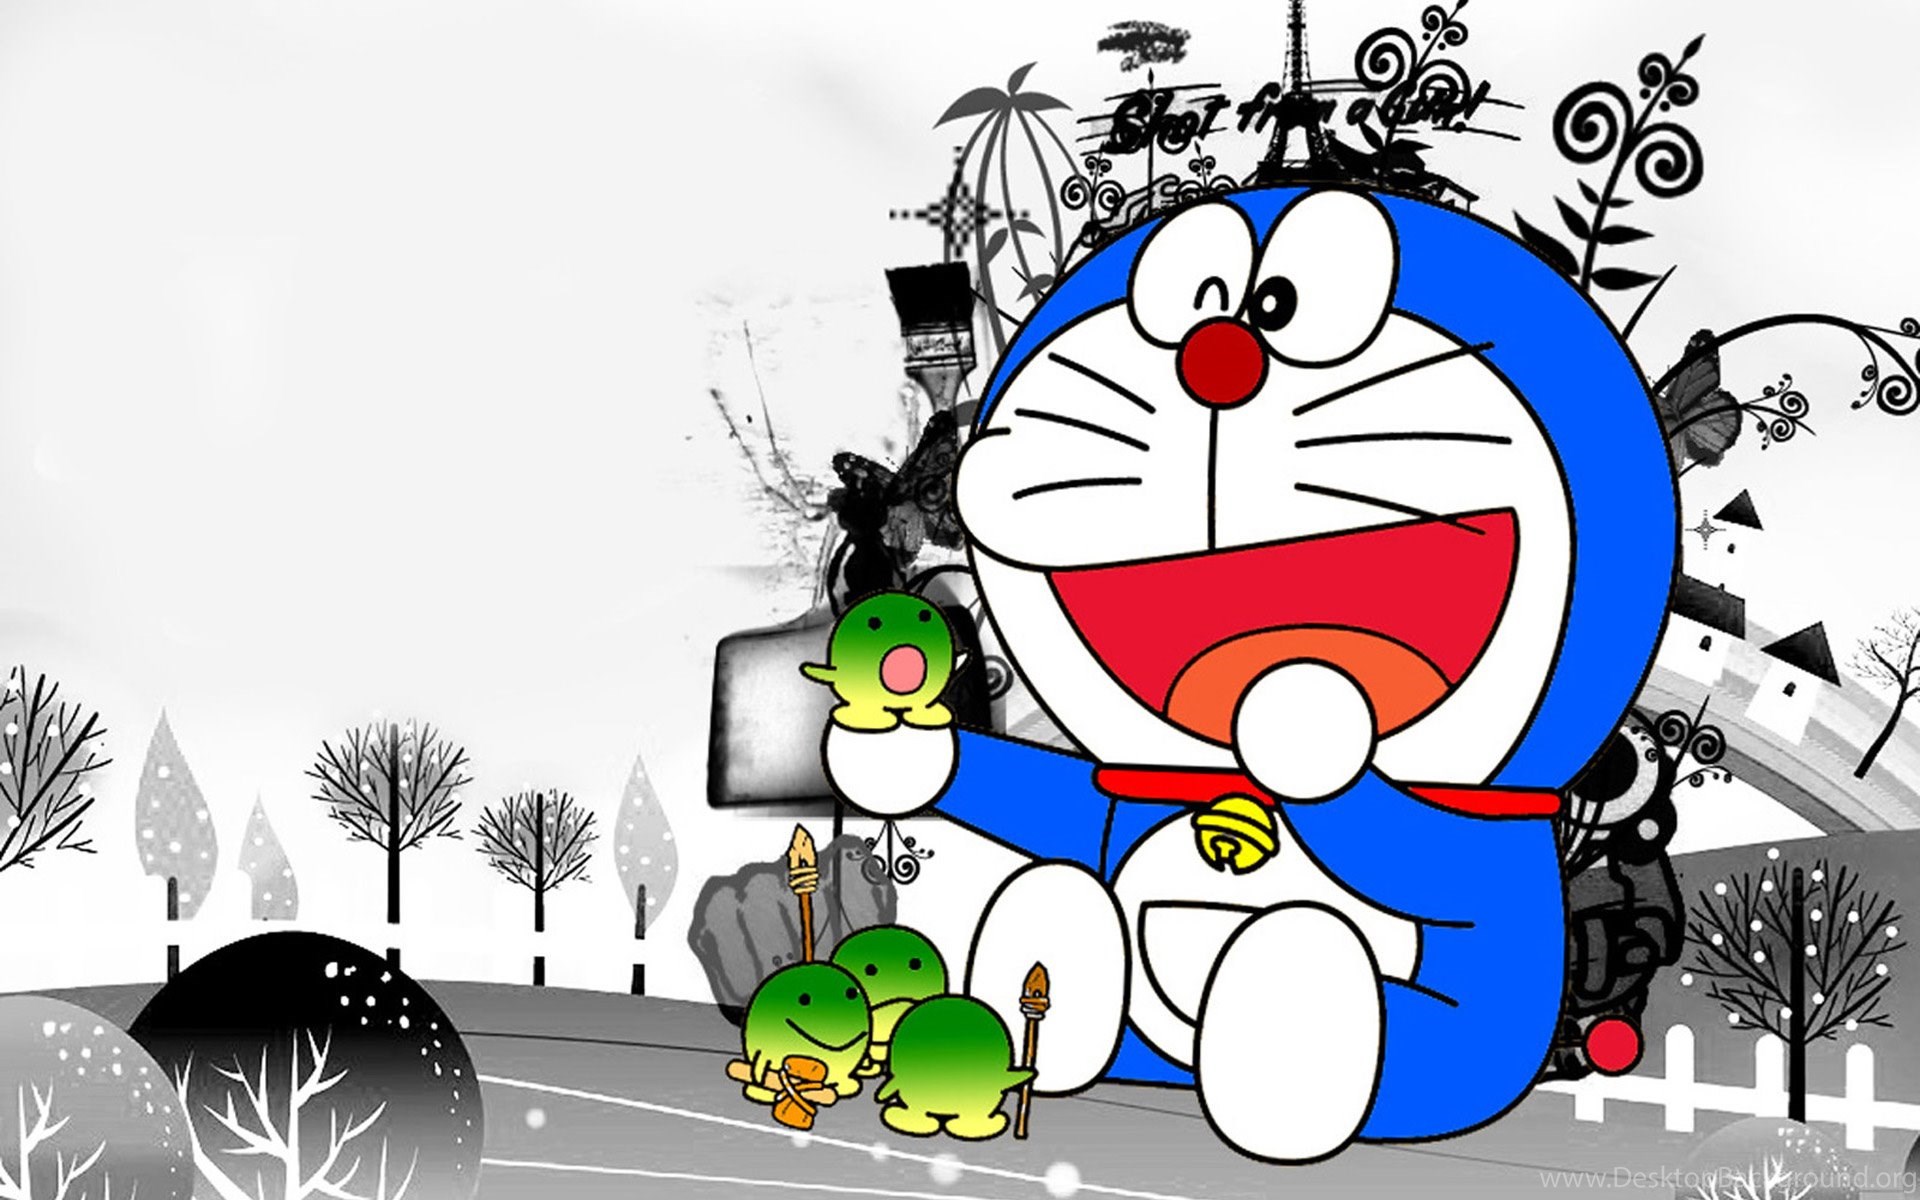 Doraemon Htc One X S720e Wallpapers Android Wallpapers Free